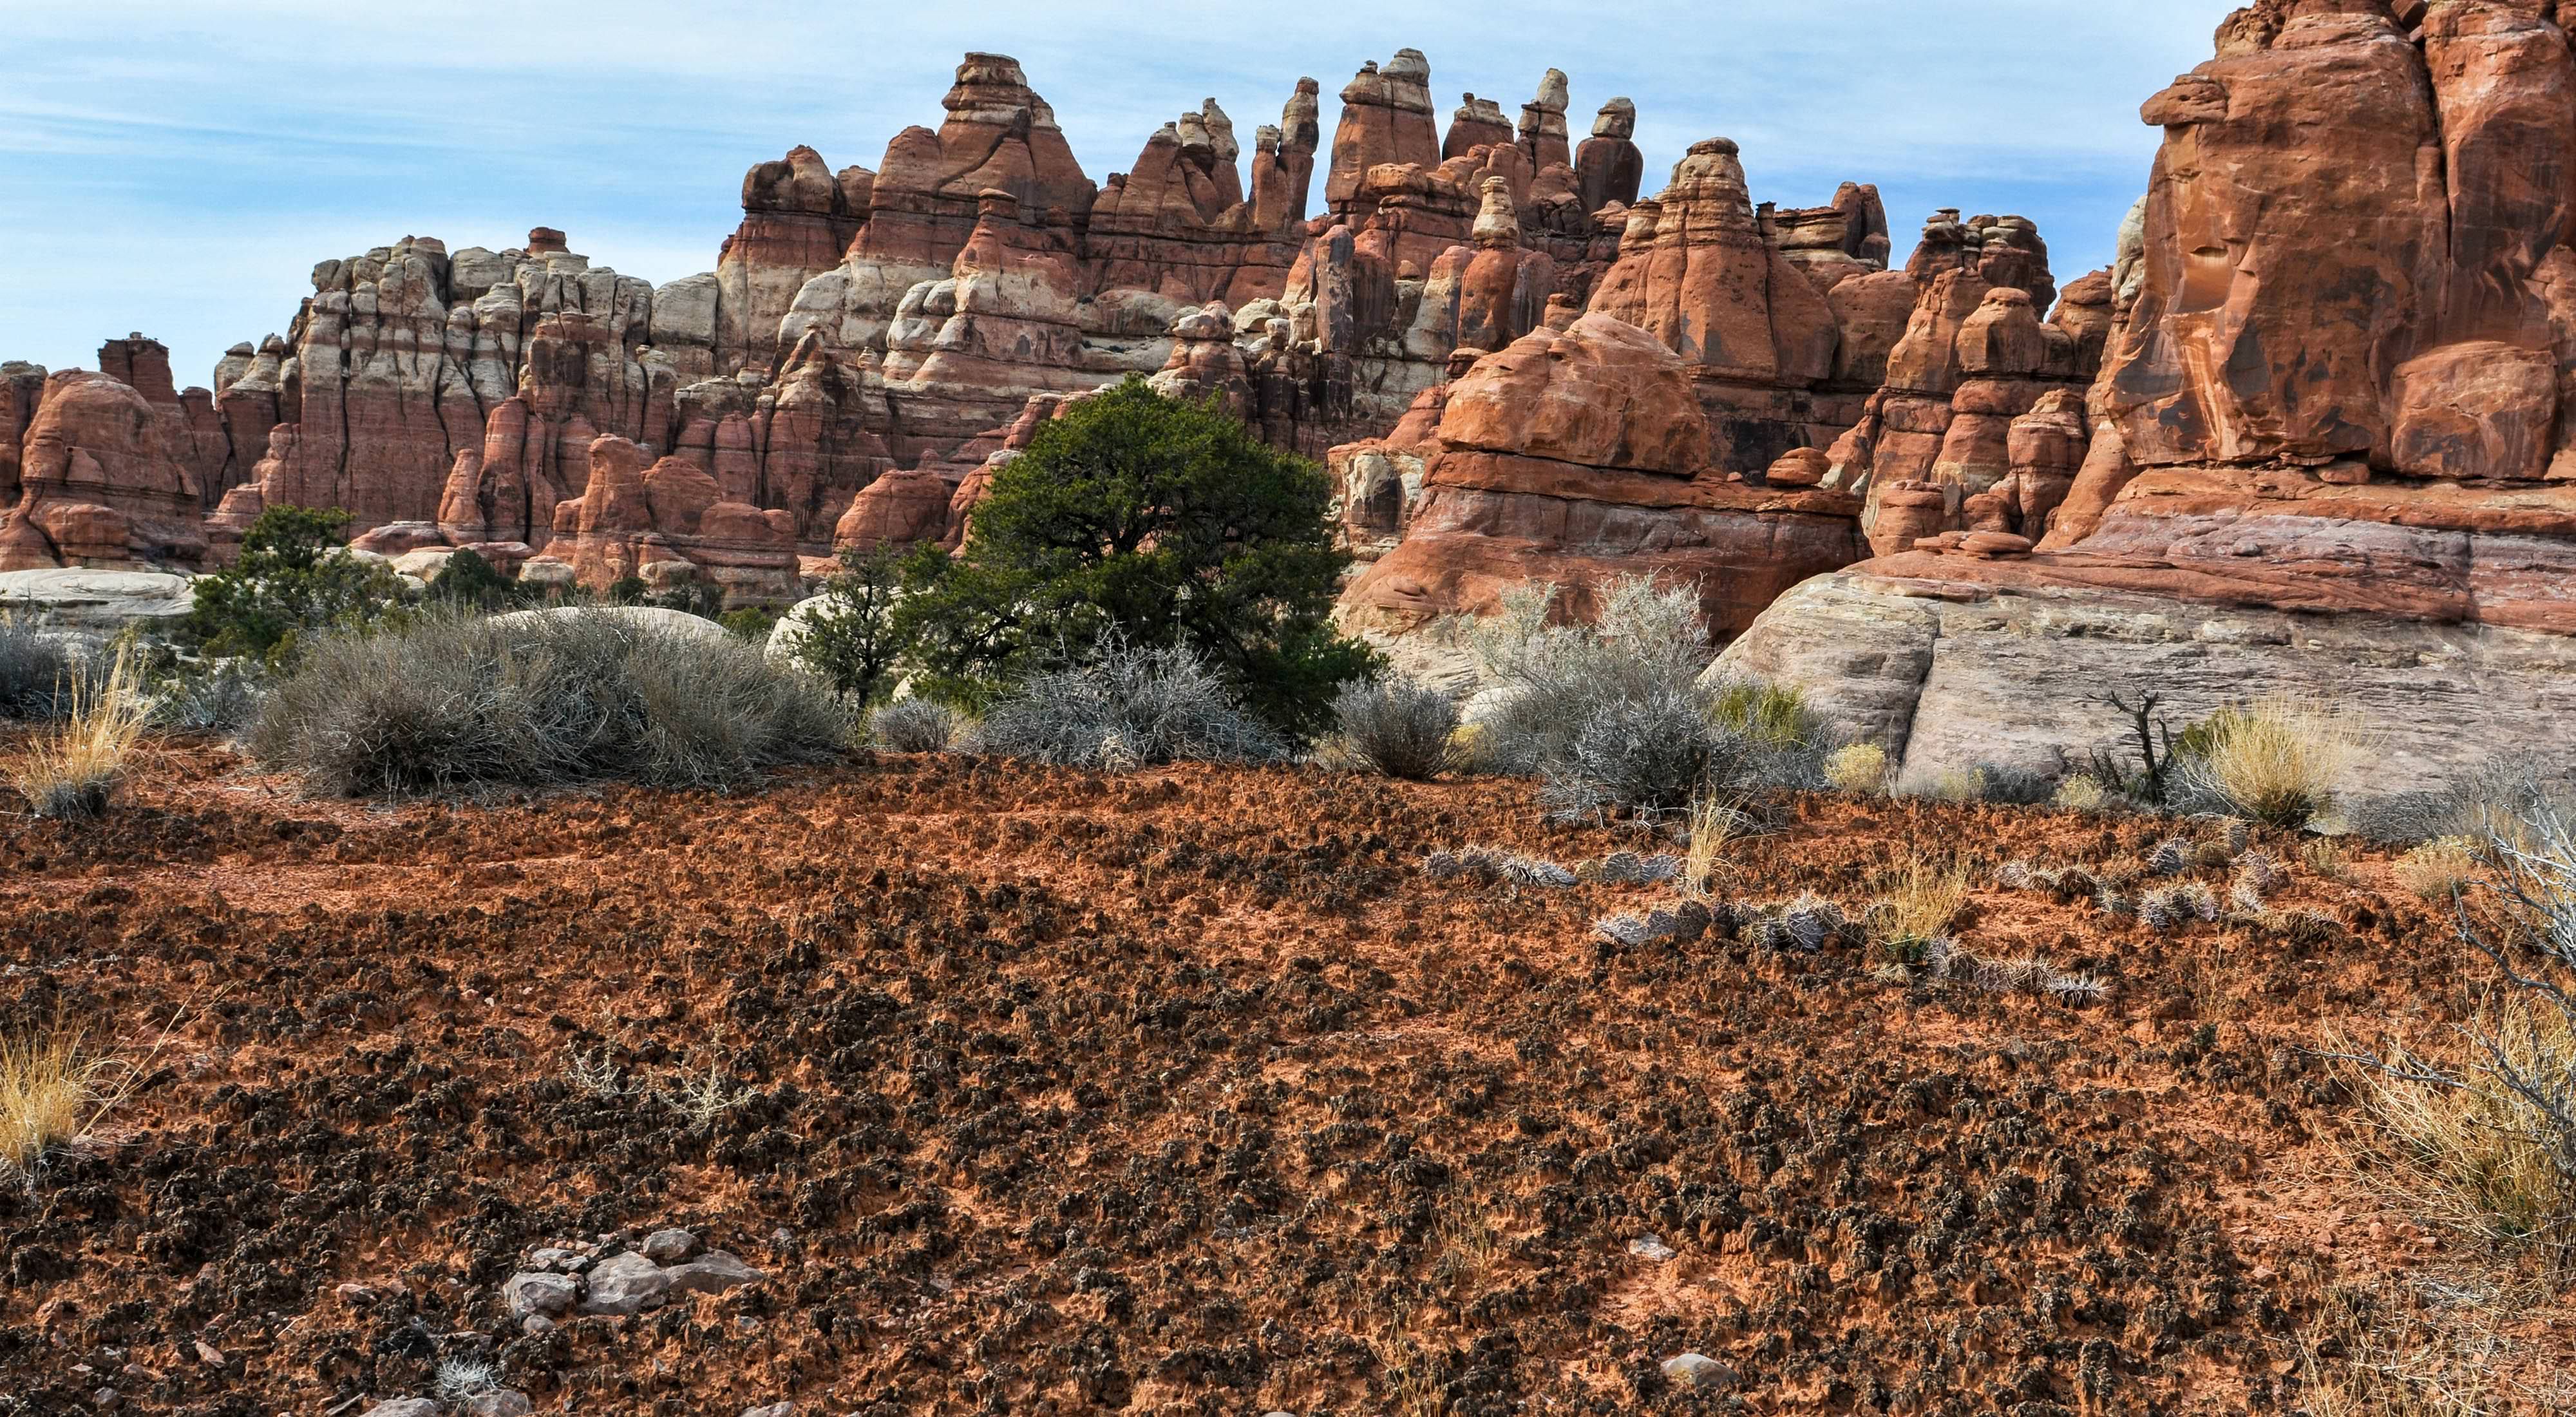 A landscape of red rock cliffs with biocrust in the foreground. The biocrust looks like a crusty reddish brown soil with scattered cactus plants.